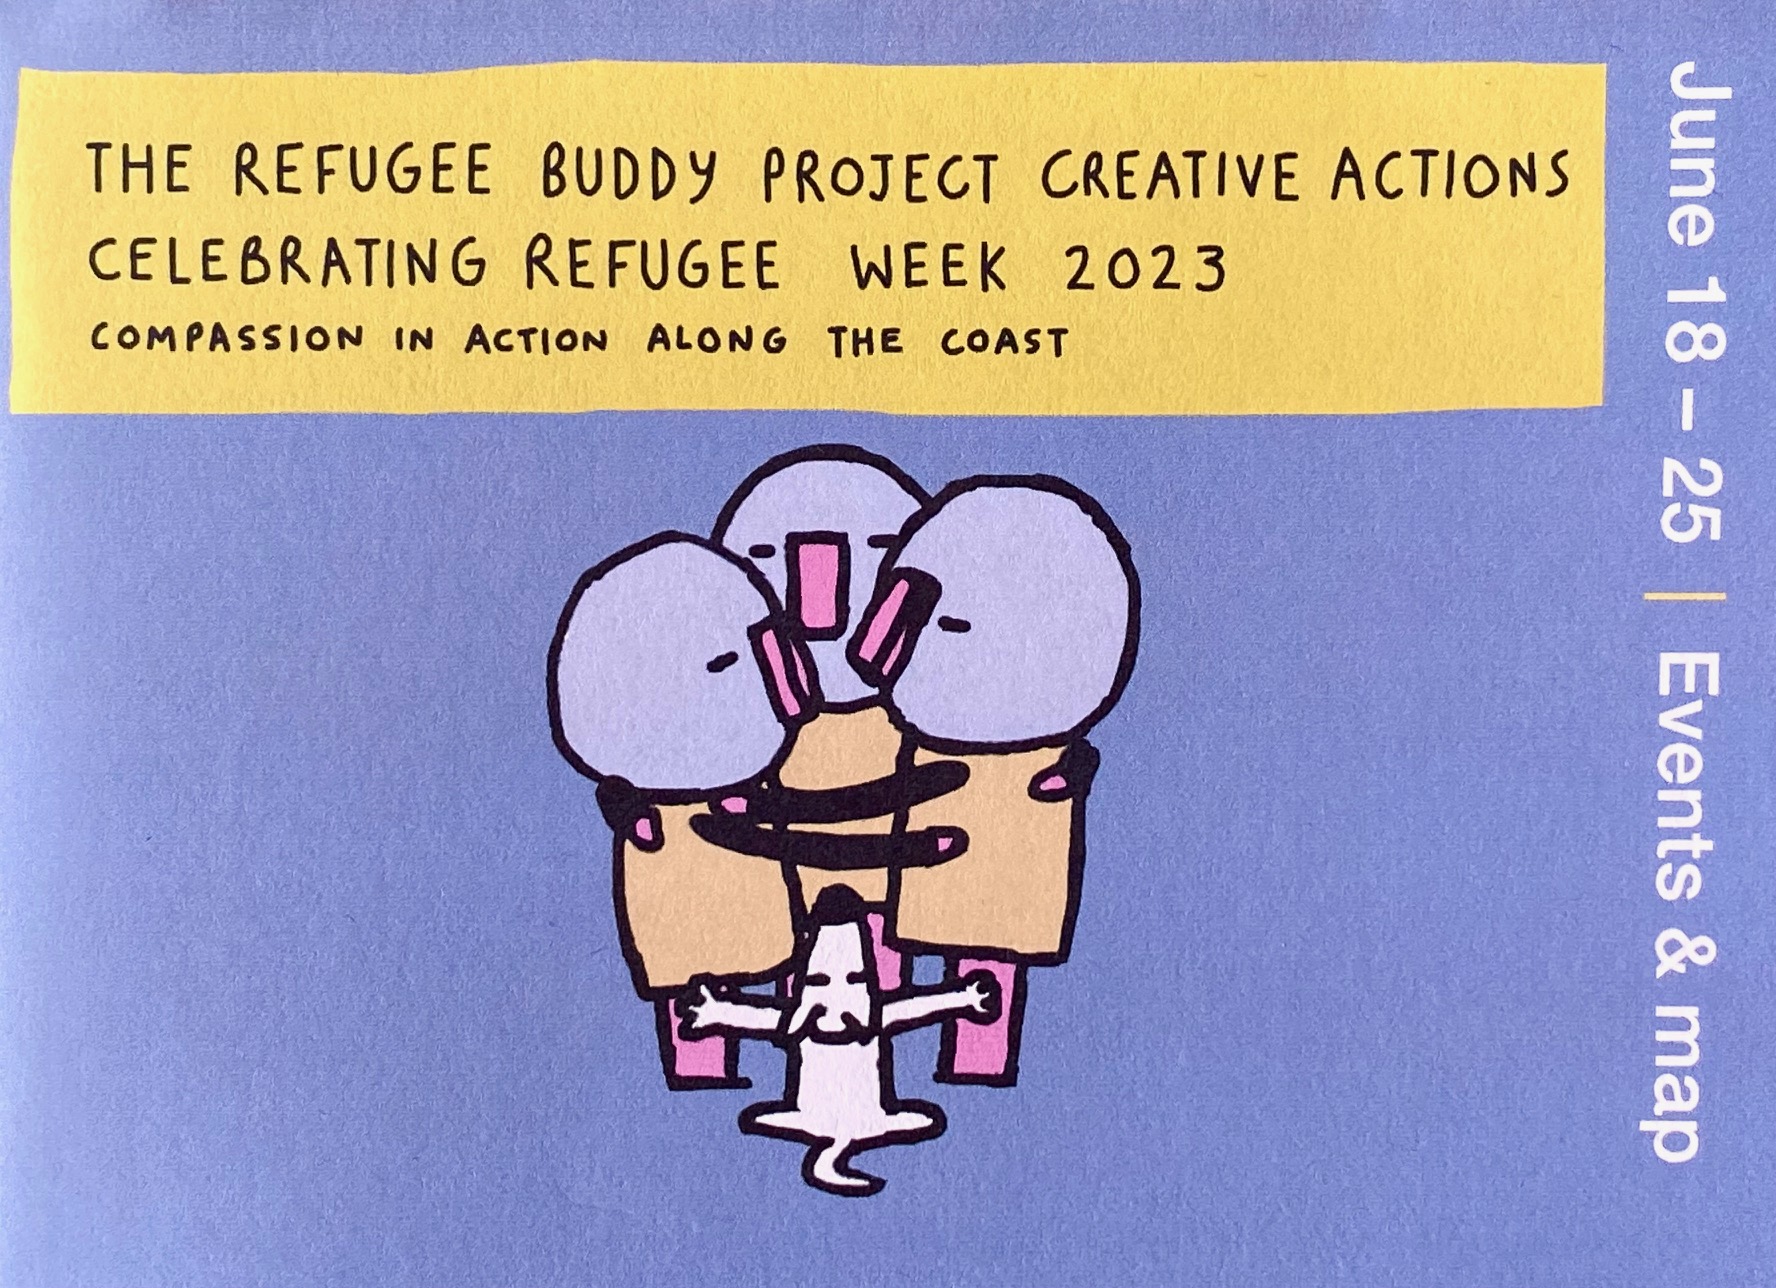 The Refugee Buddy Project Creative Actions Celebrating Refugee Week in Hastings, St Leonards, Bexhill, Eastbourne, Rye